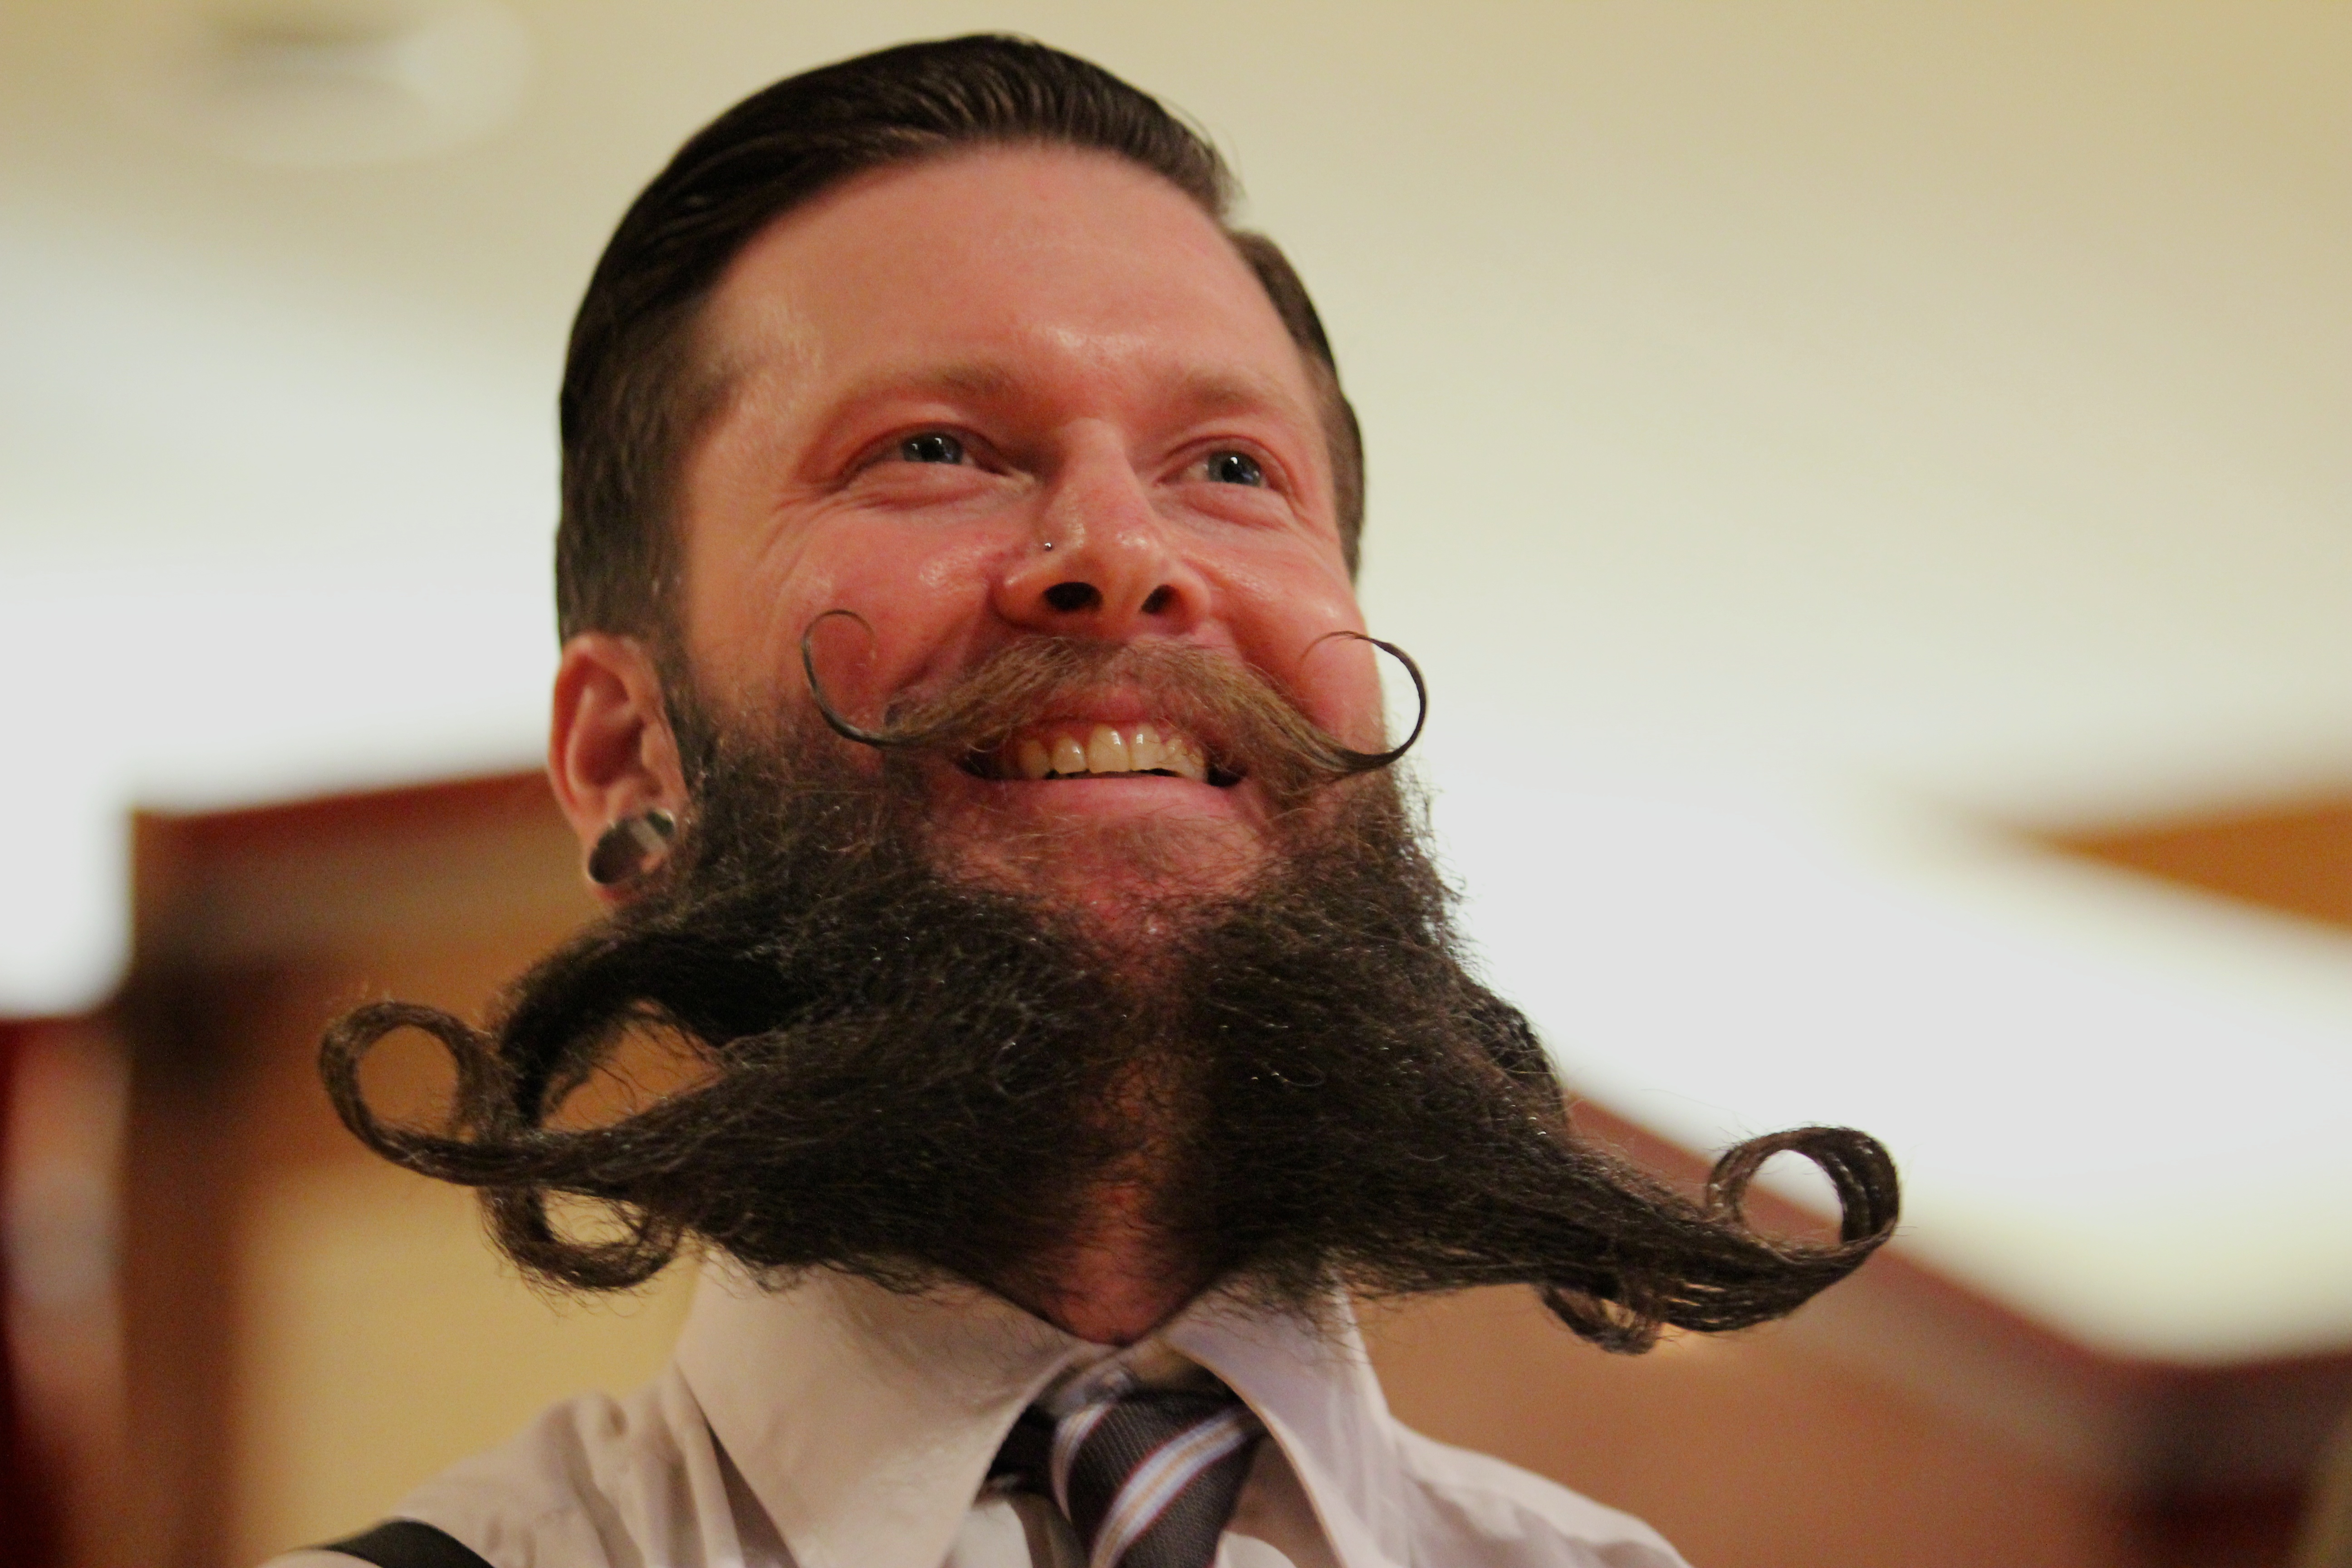 BeardFest Grows In Popularity After Years of Grooming